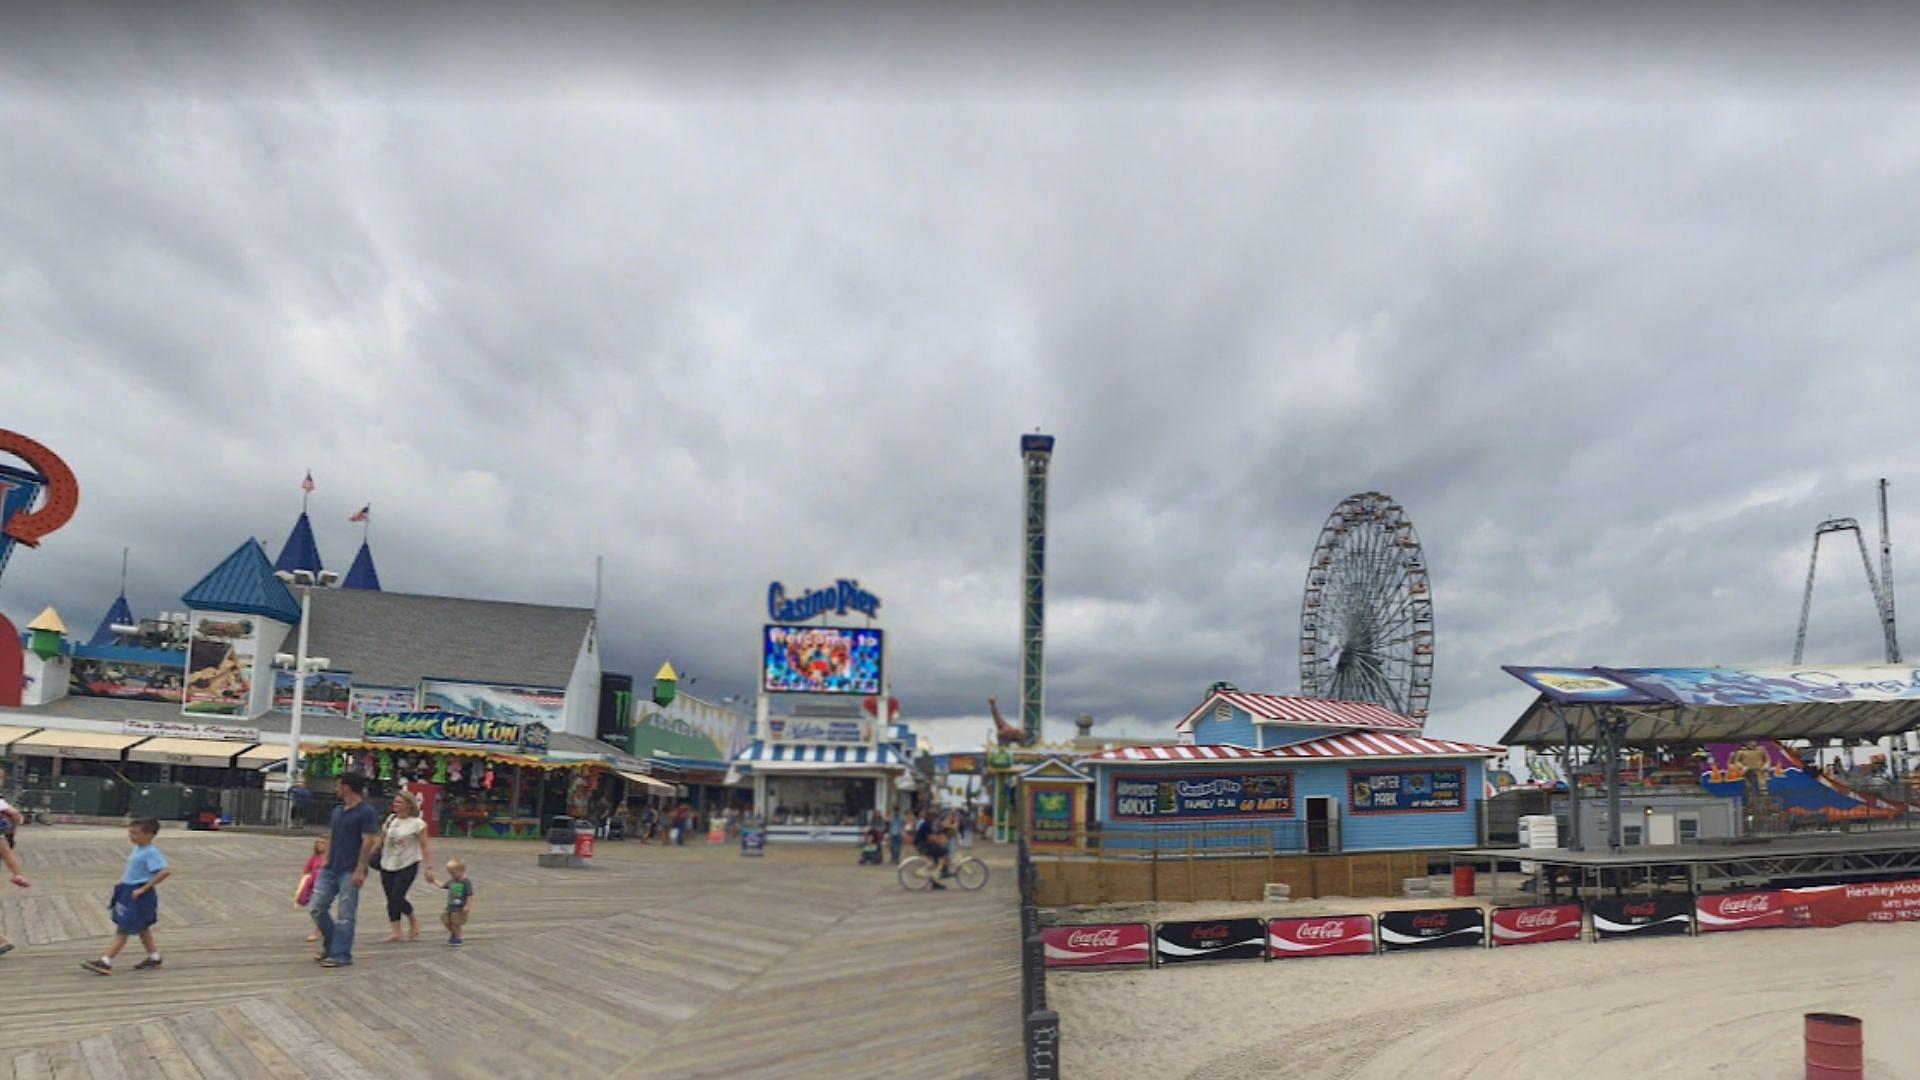 Vibrant and bustling boardwalk at Jersey Shore, New Jersey